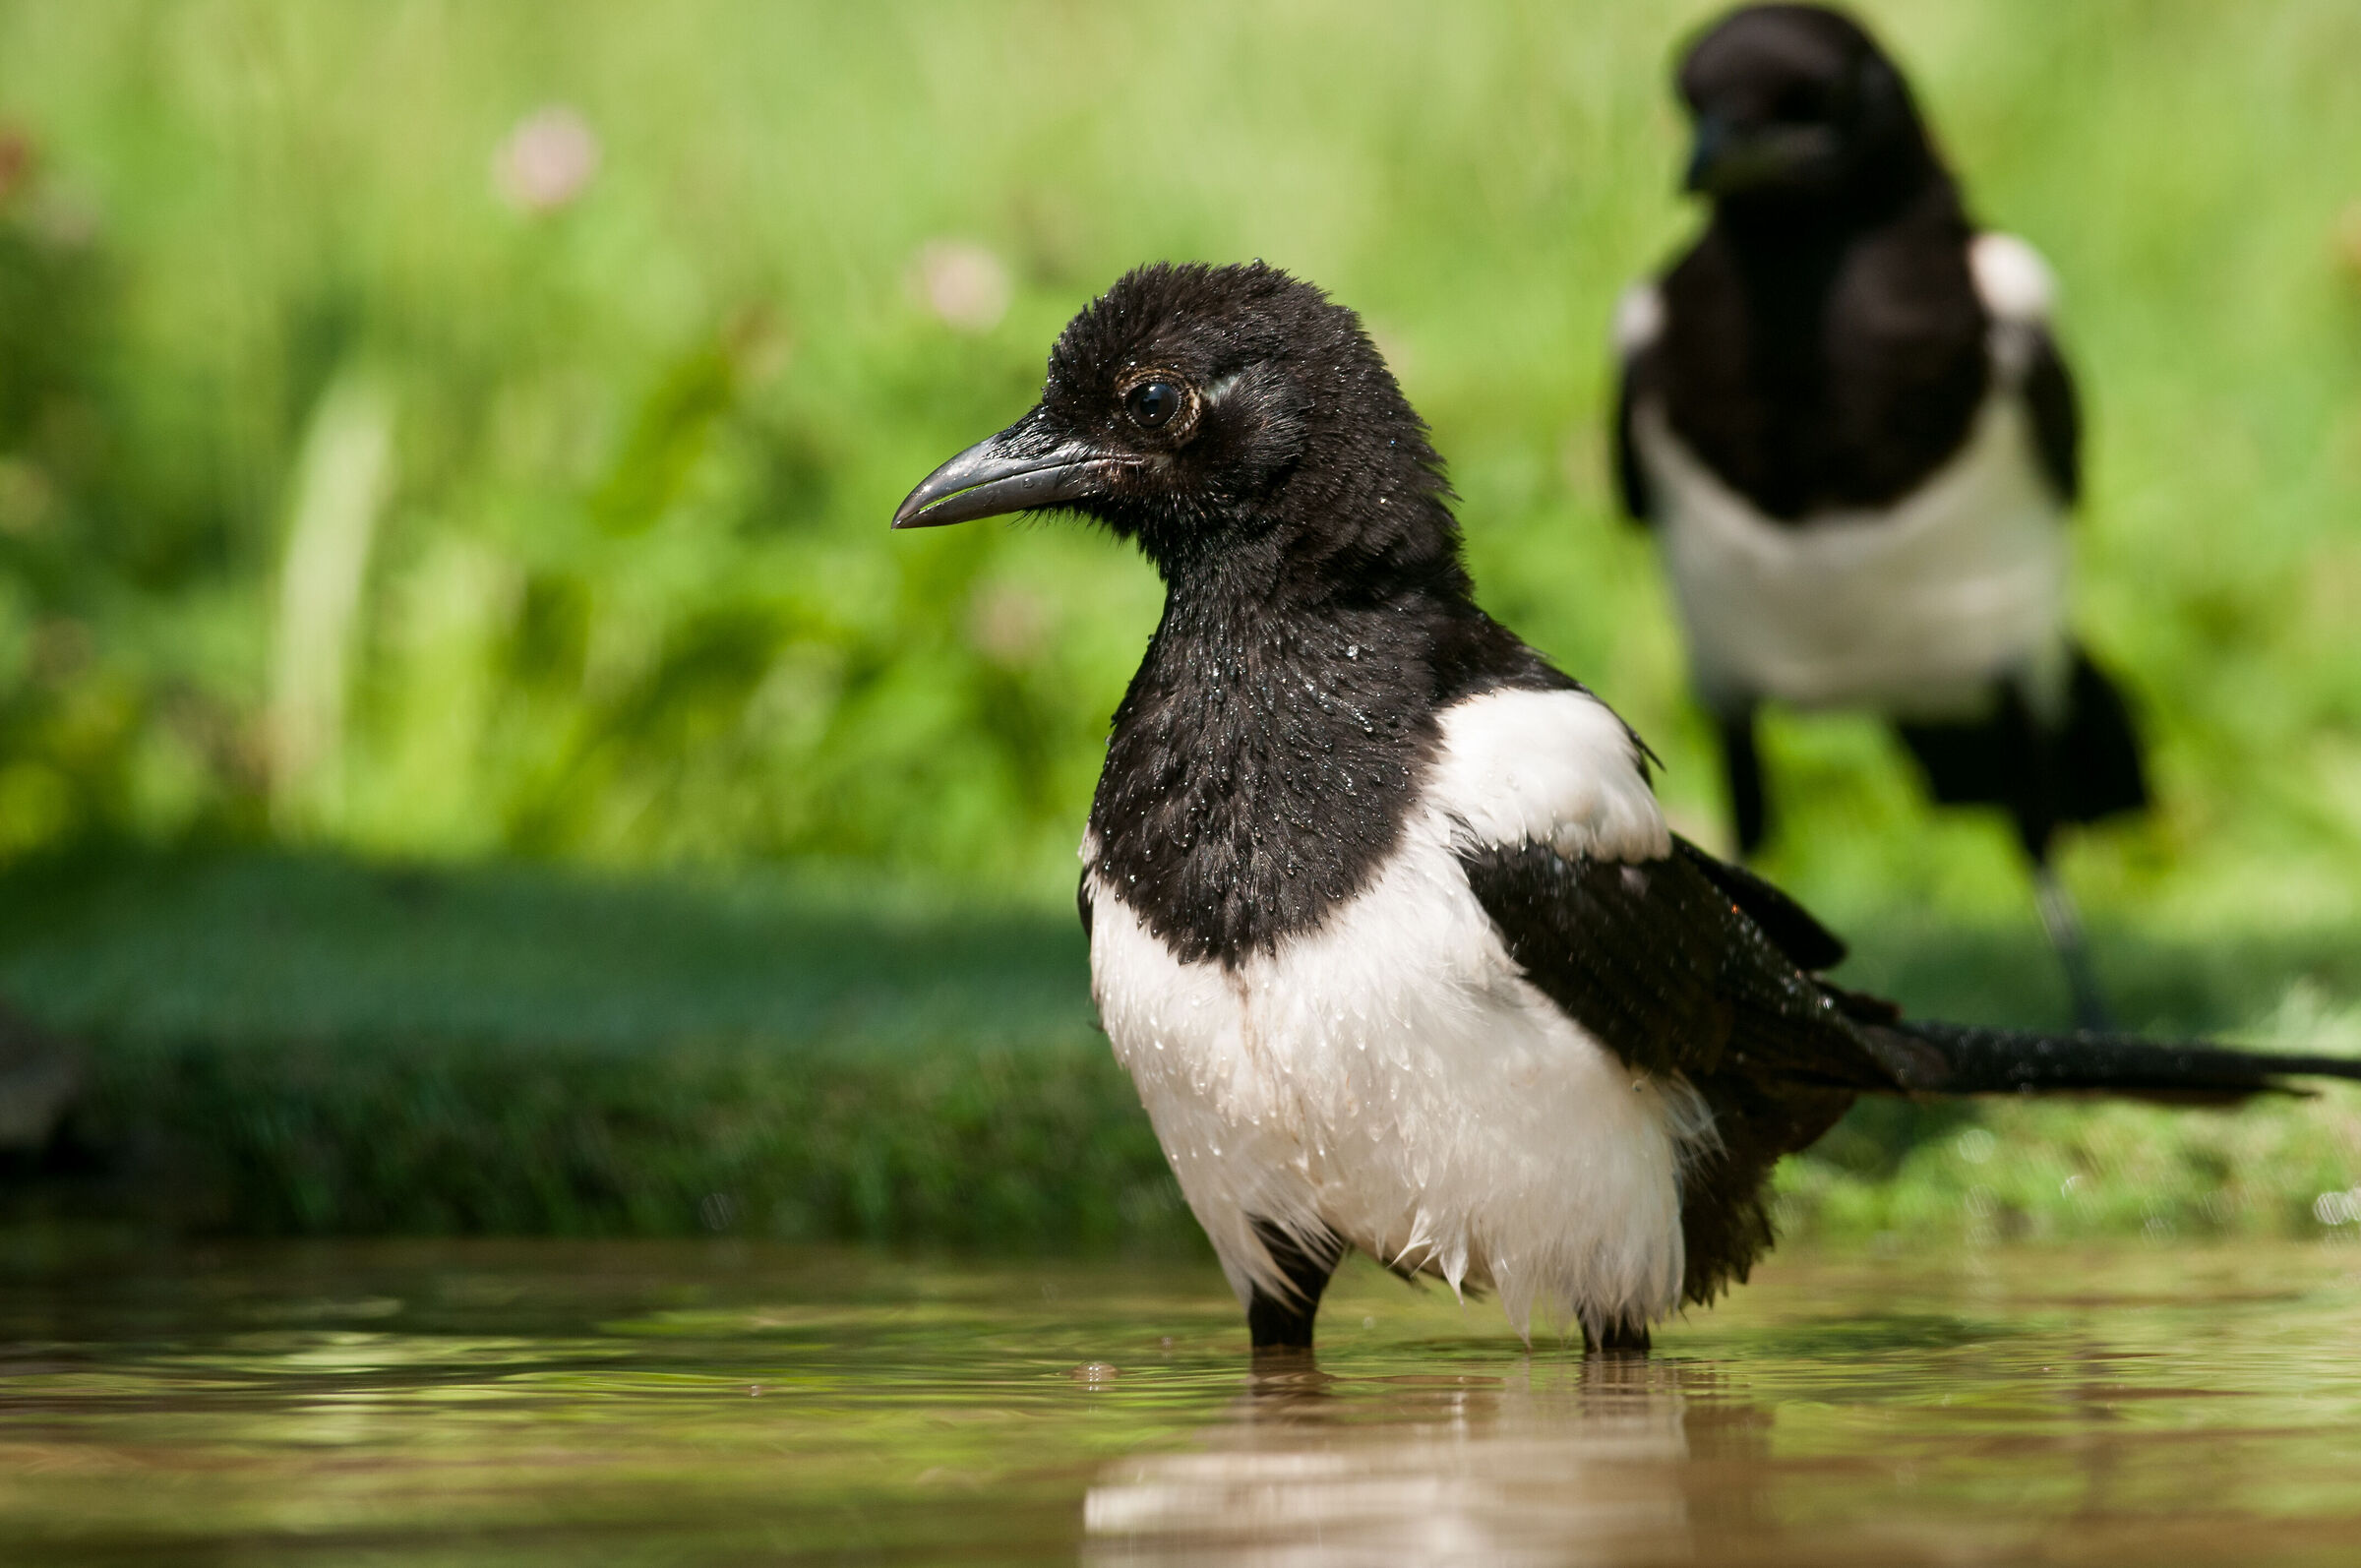 Magpie at the bath...